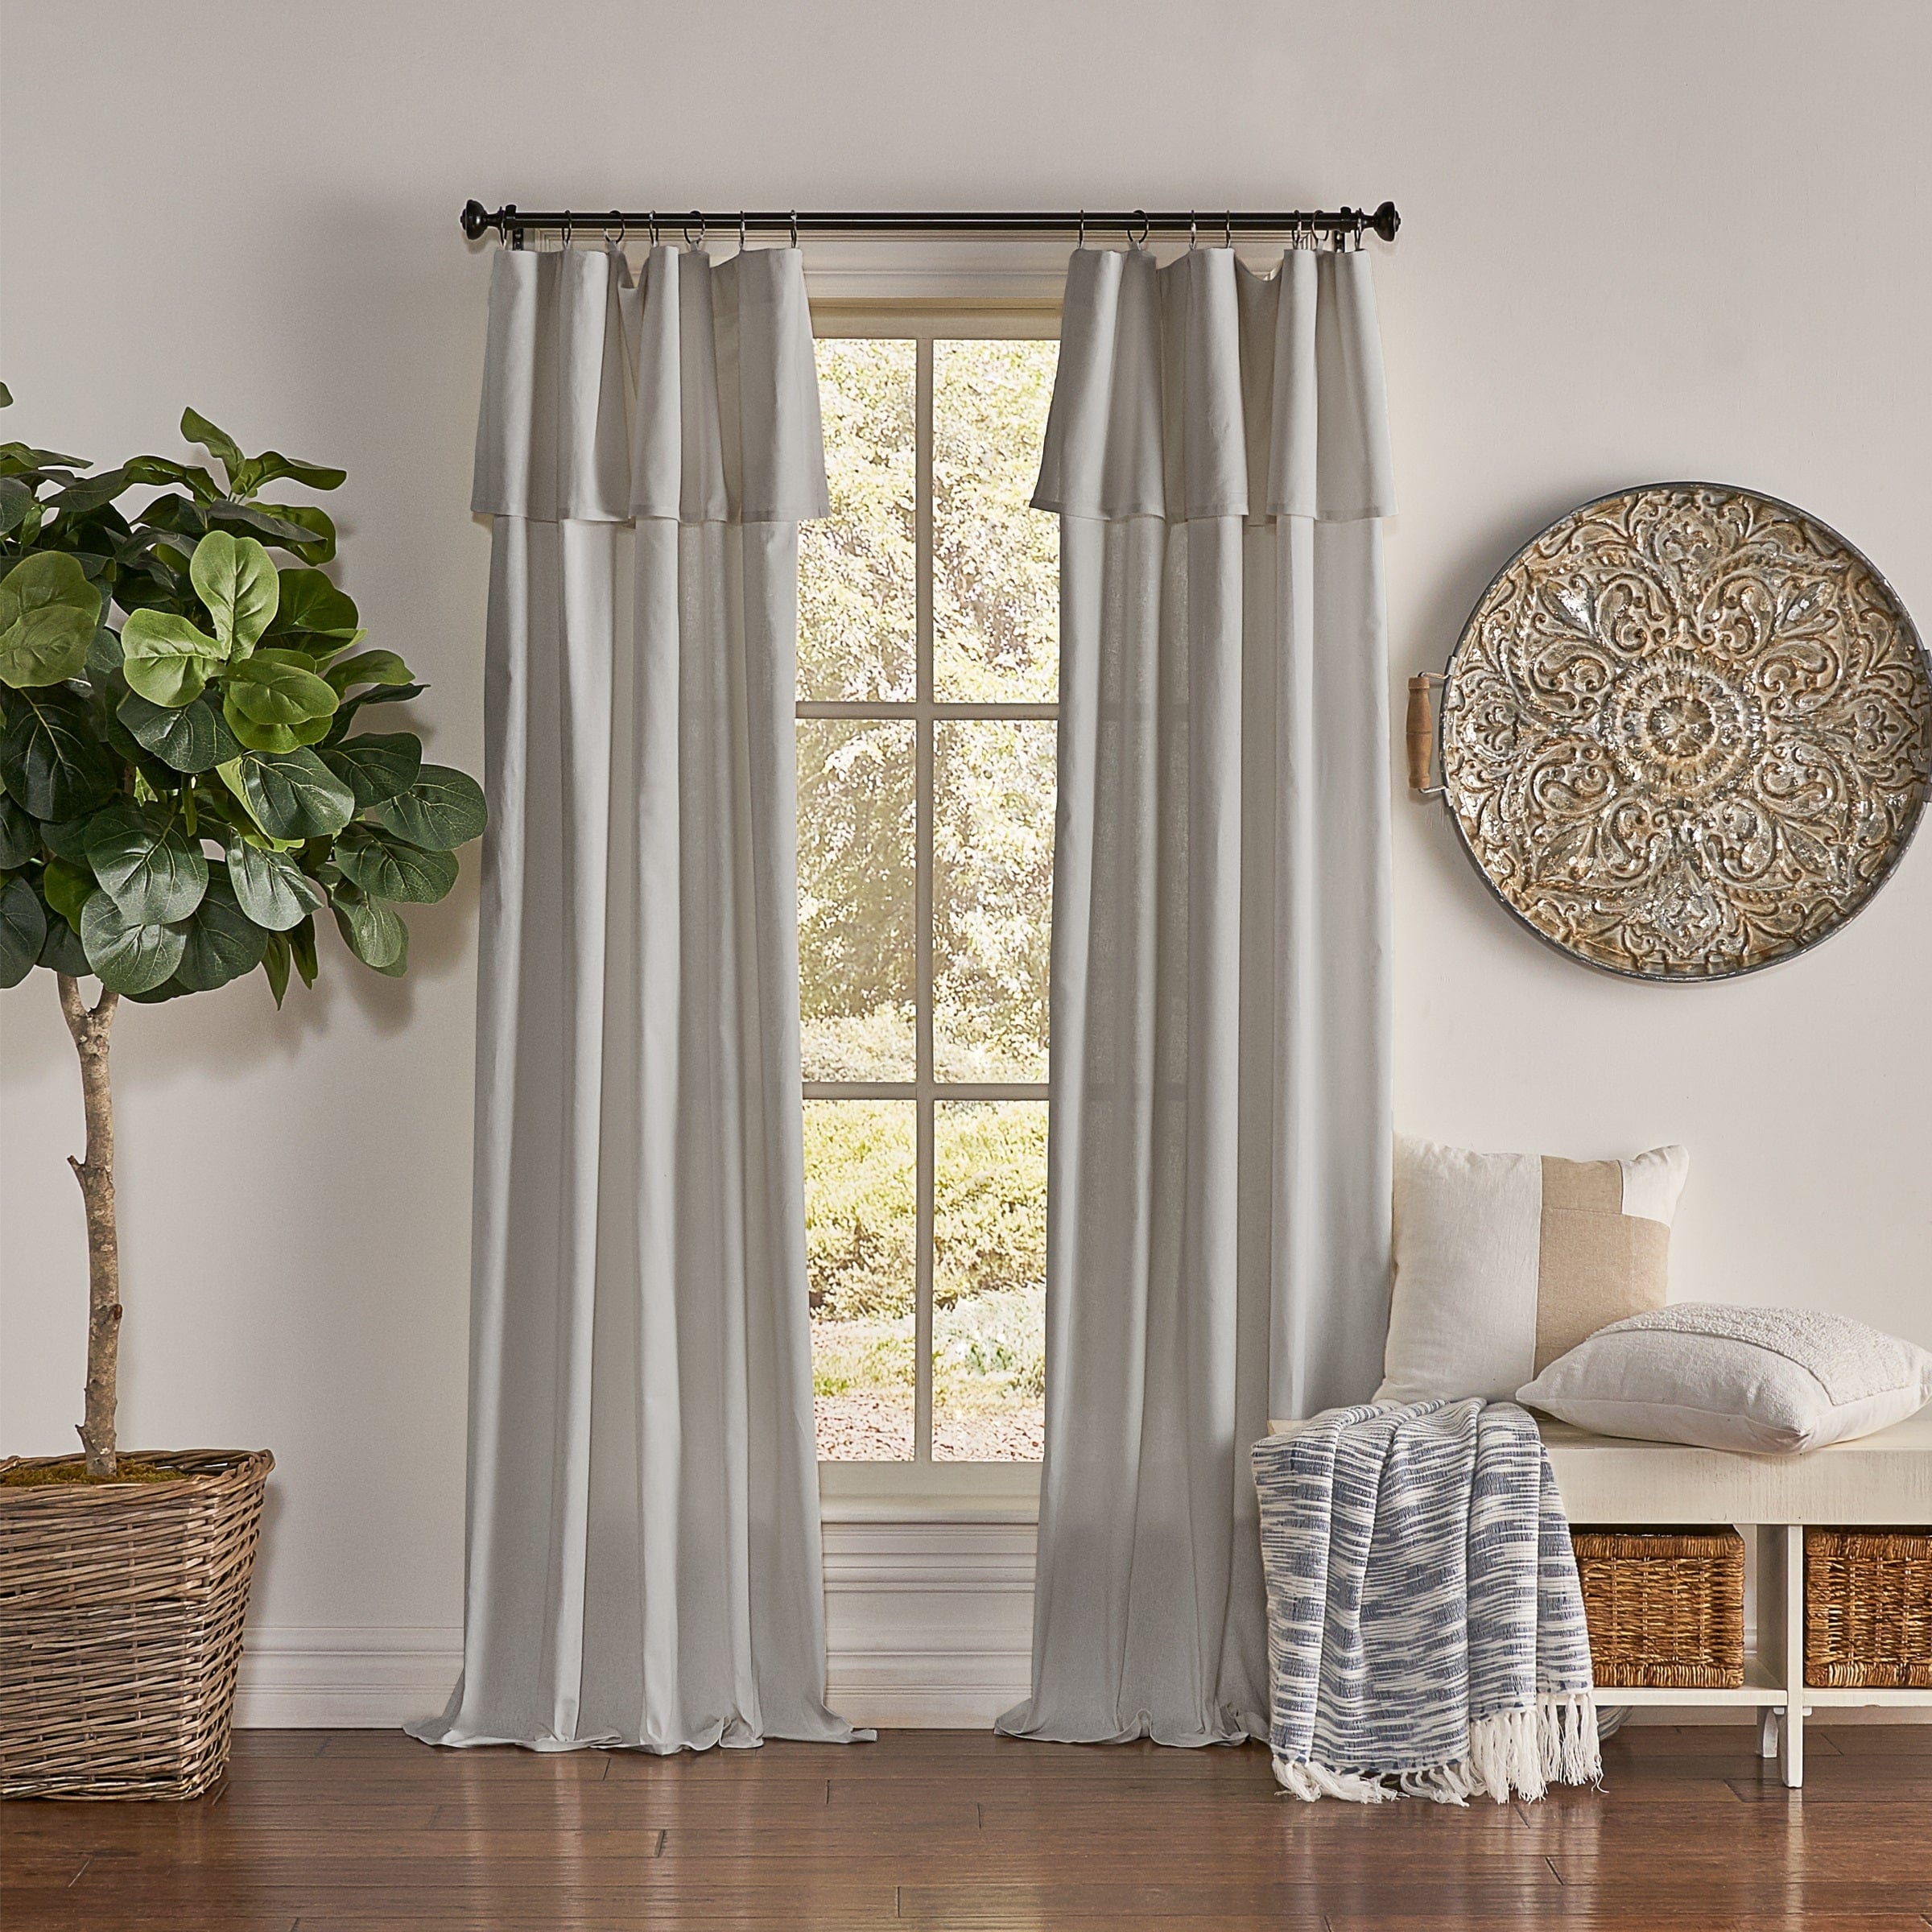 Photos - Curtains & Drapes SureFit Mercantile Drop Cloth Solid Curtain Panel with Valance in Grey 50